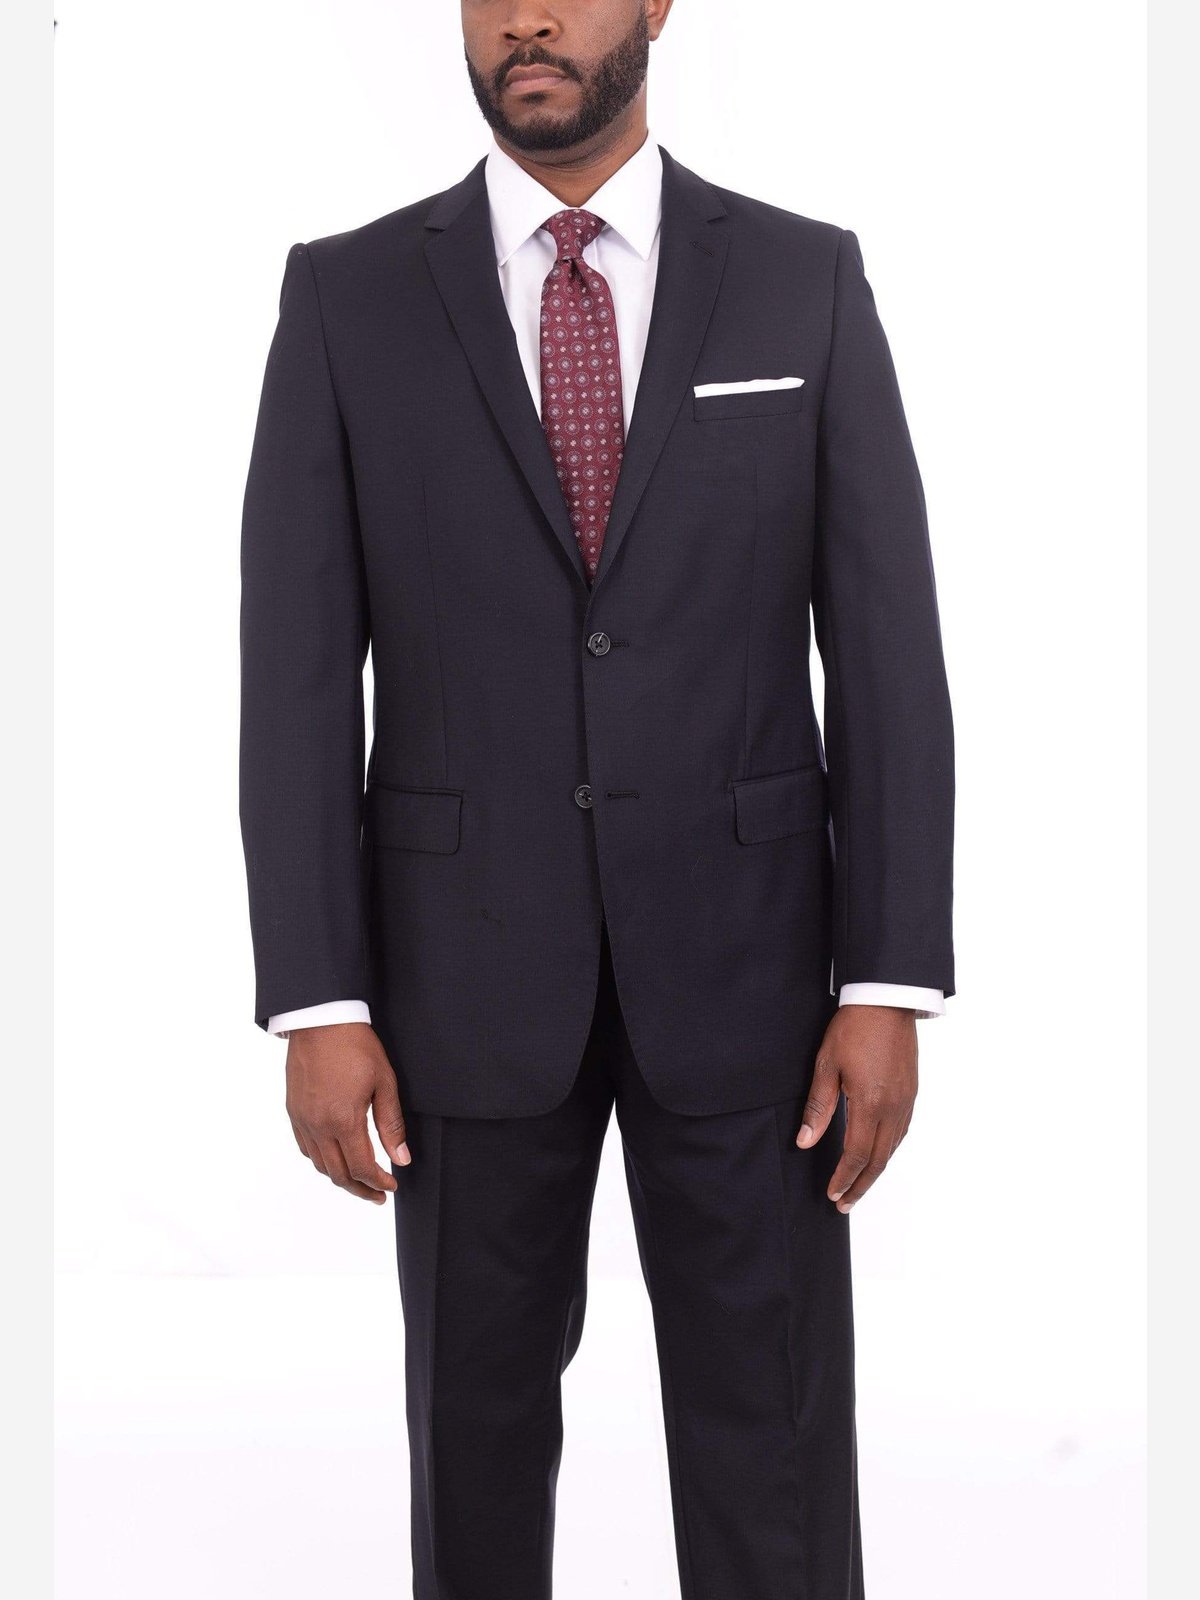 Giorgio Cosani TWO PIECE SUITS 40R Giorgio Cosani Regular Fit Solid Navy Blue Two Button Wool Cashmere Blend Suit